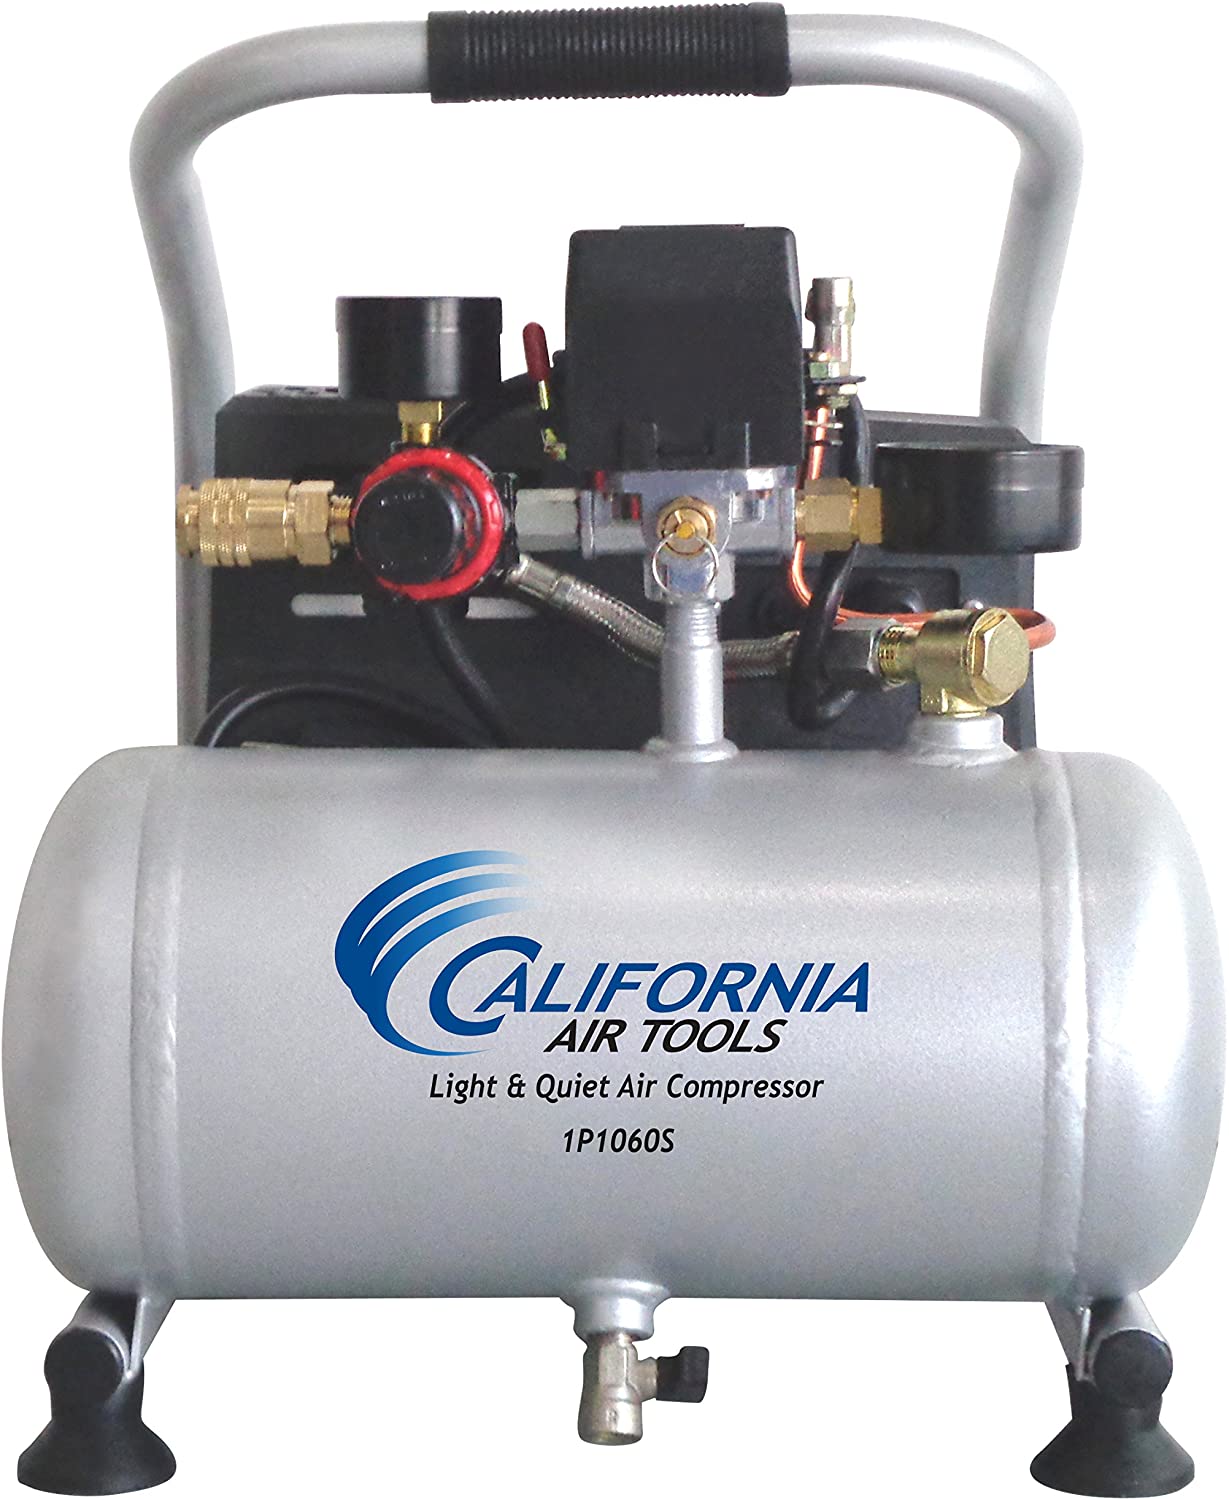 California Air Tools 8010 Ultra Quiet For Home Garage